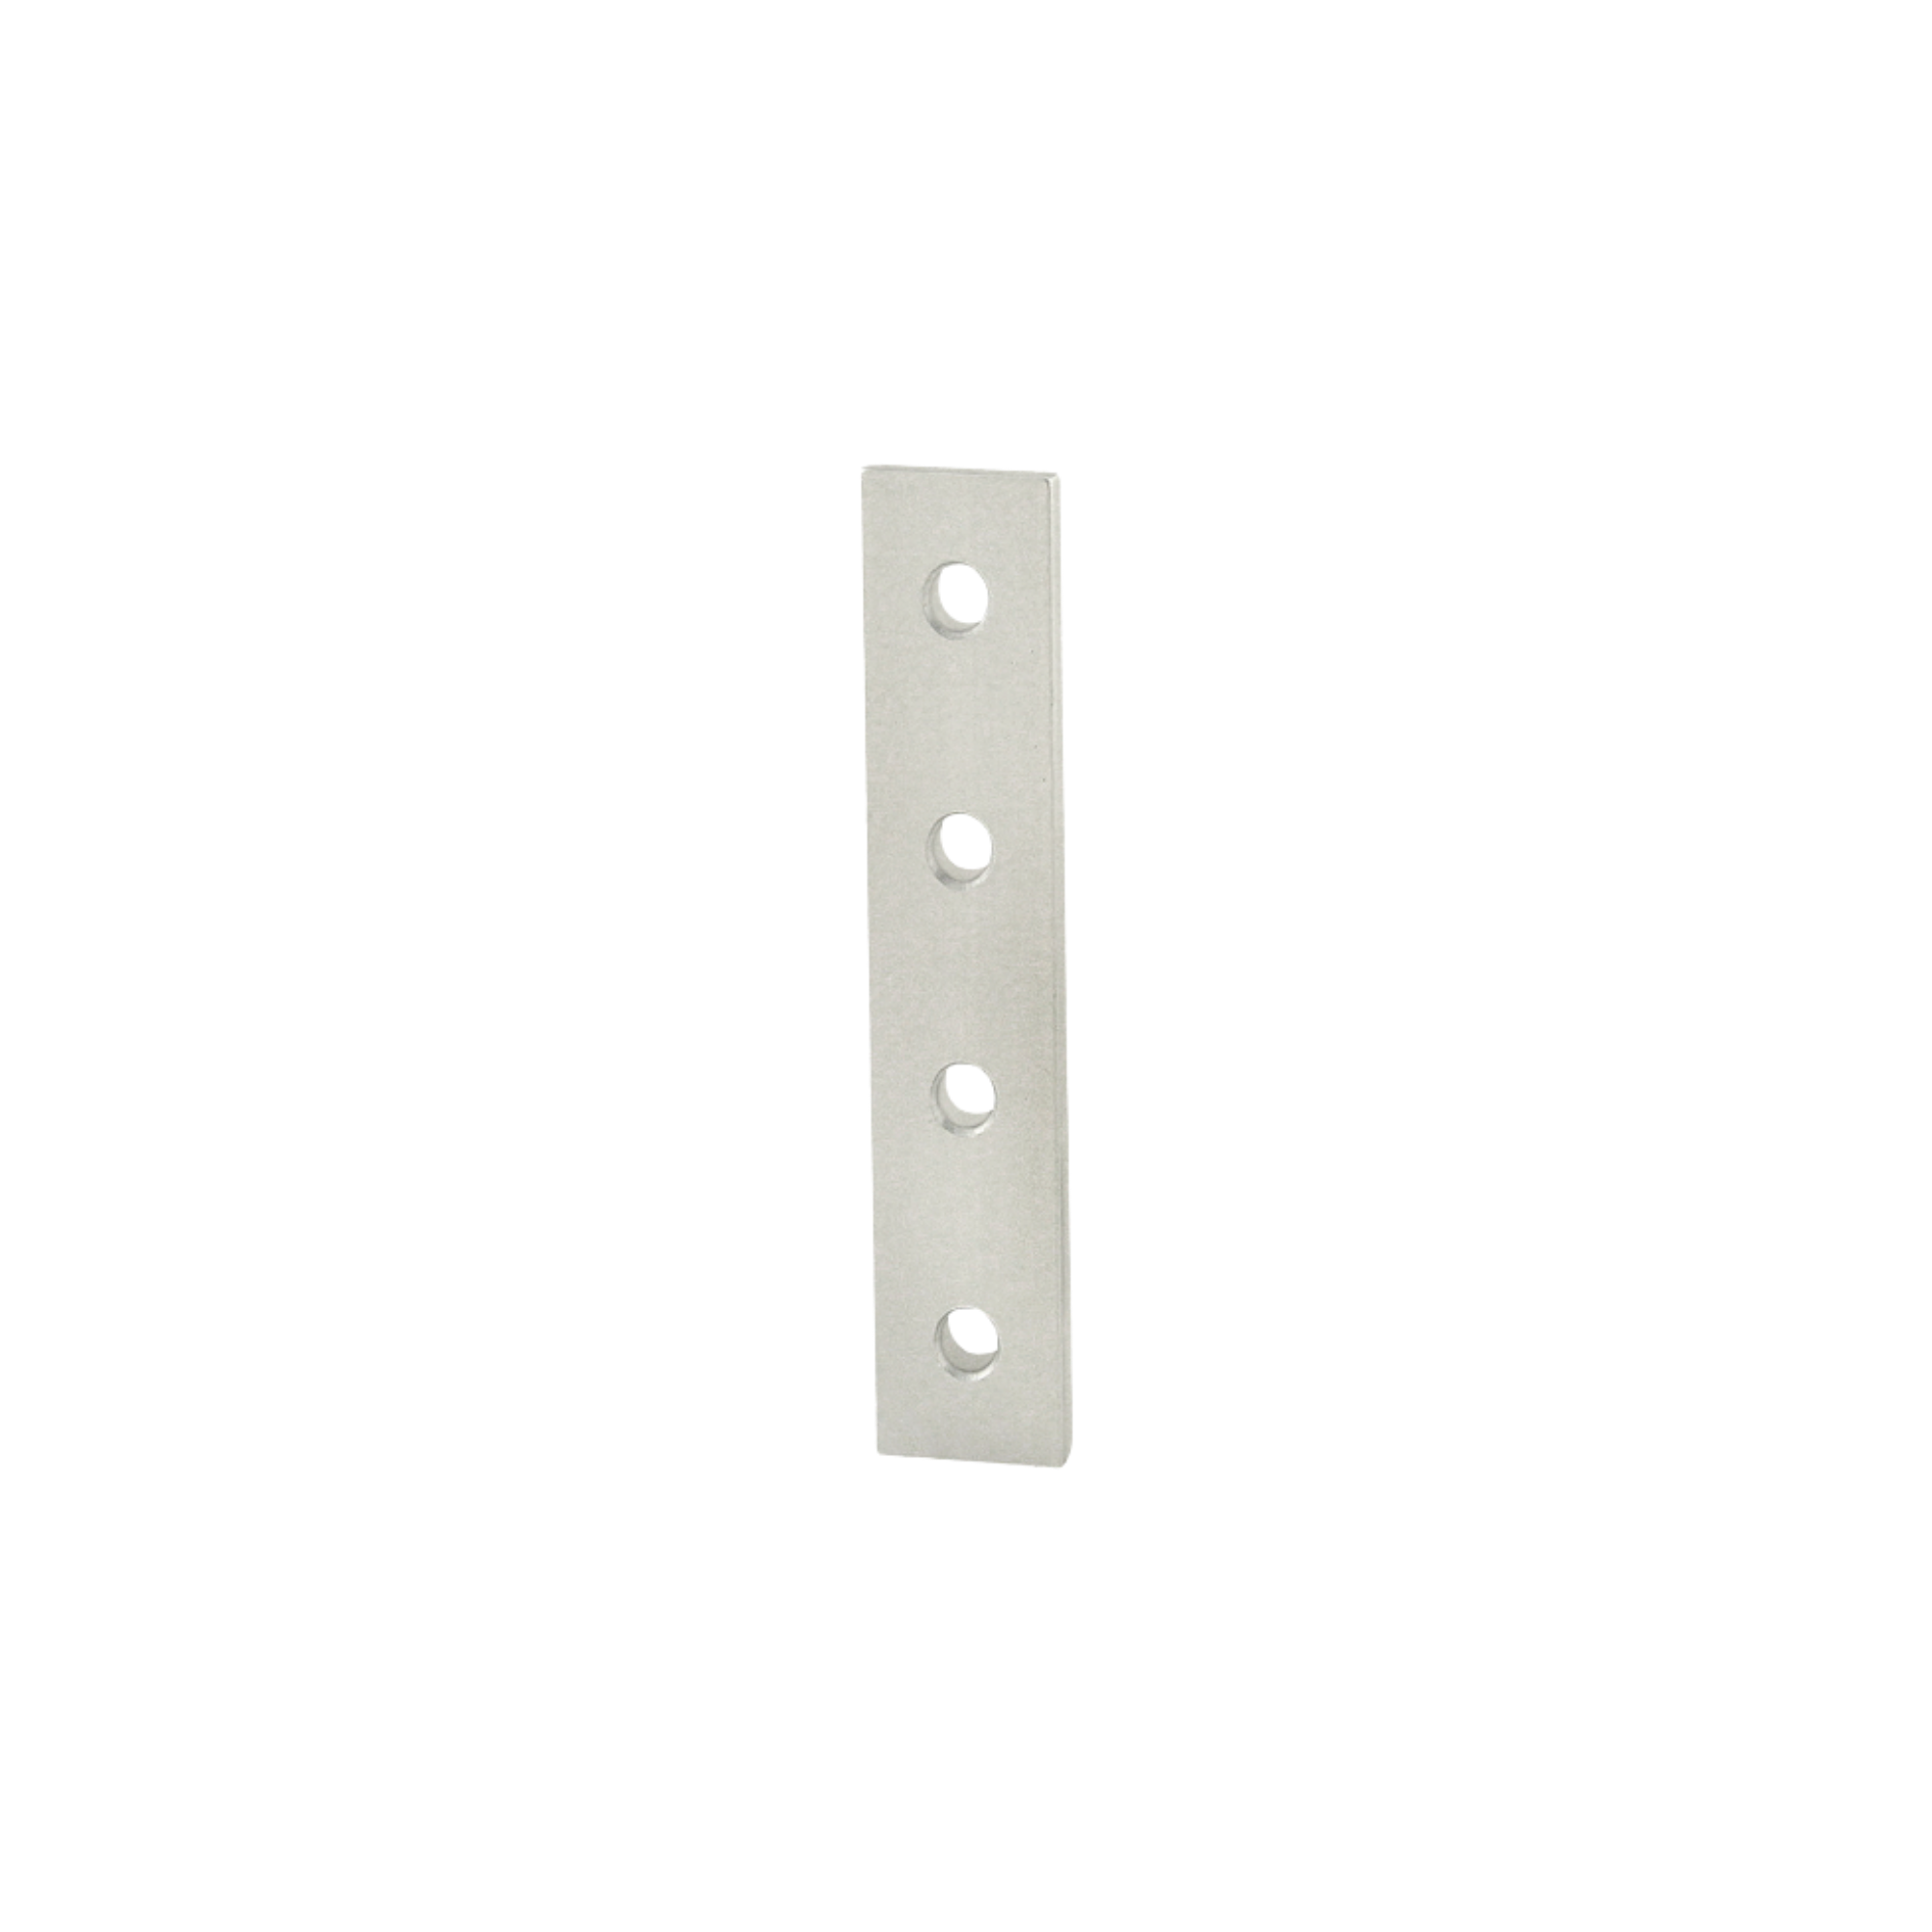 upright rectangle flat plate with four vertically lined mounting holes